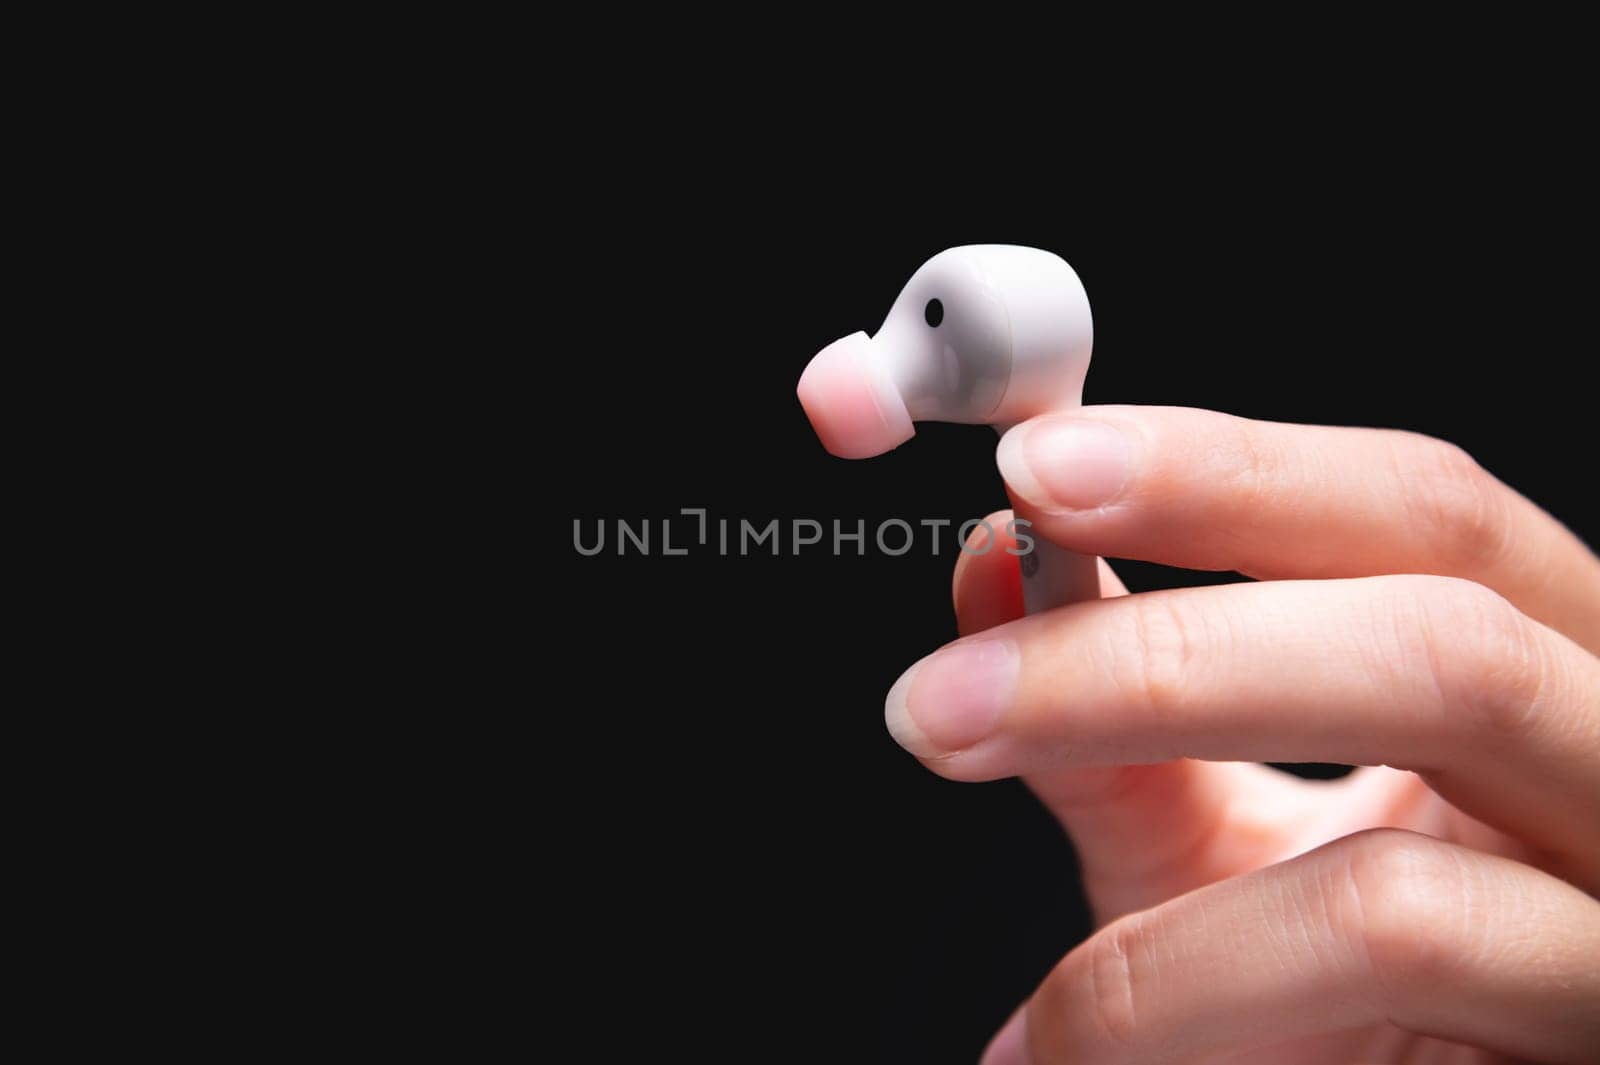 White wireless earphone in a woman's hand. Close up of vacuum earphone held in hand on dark background.